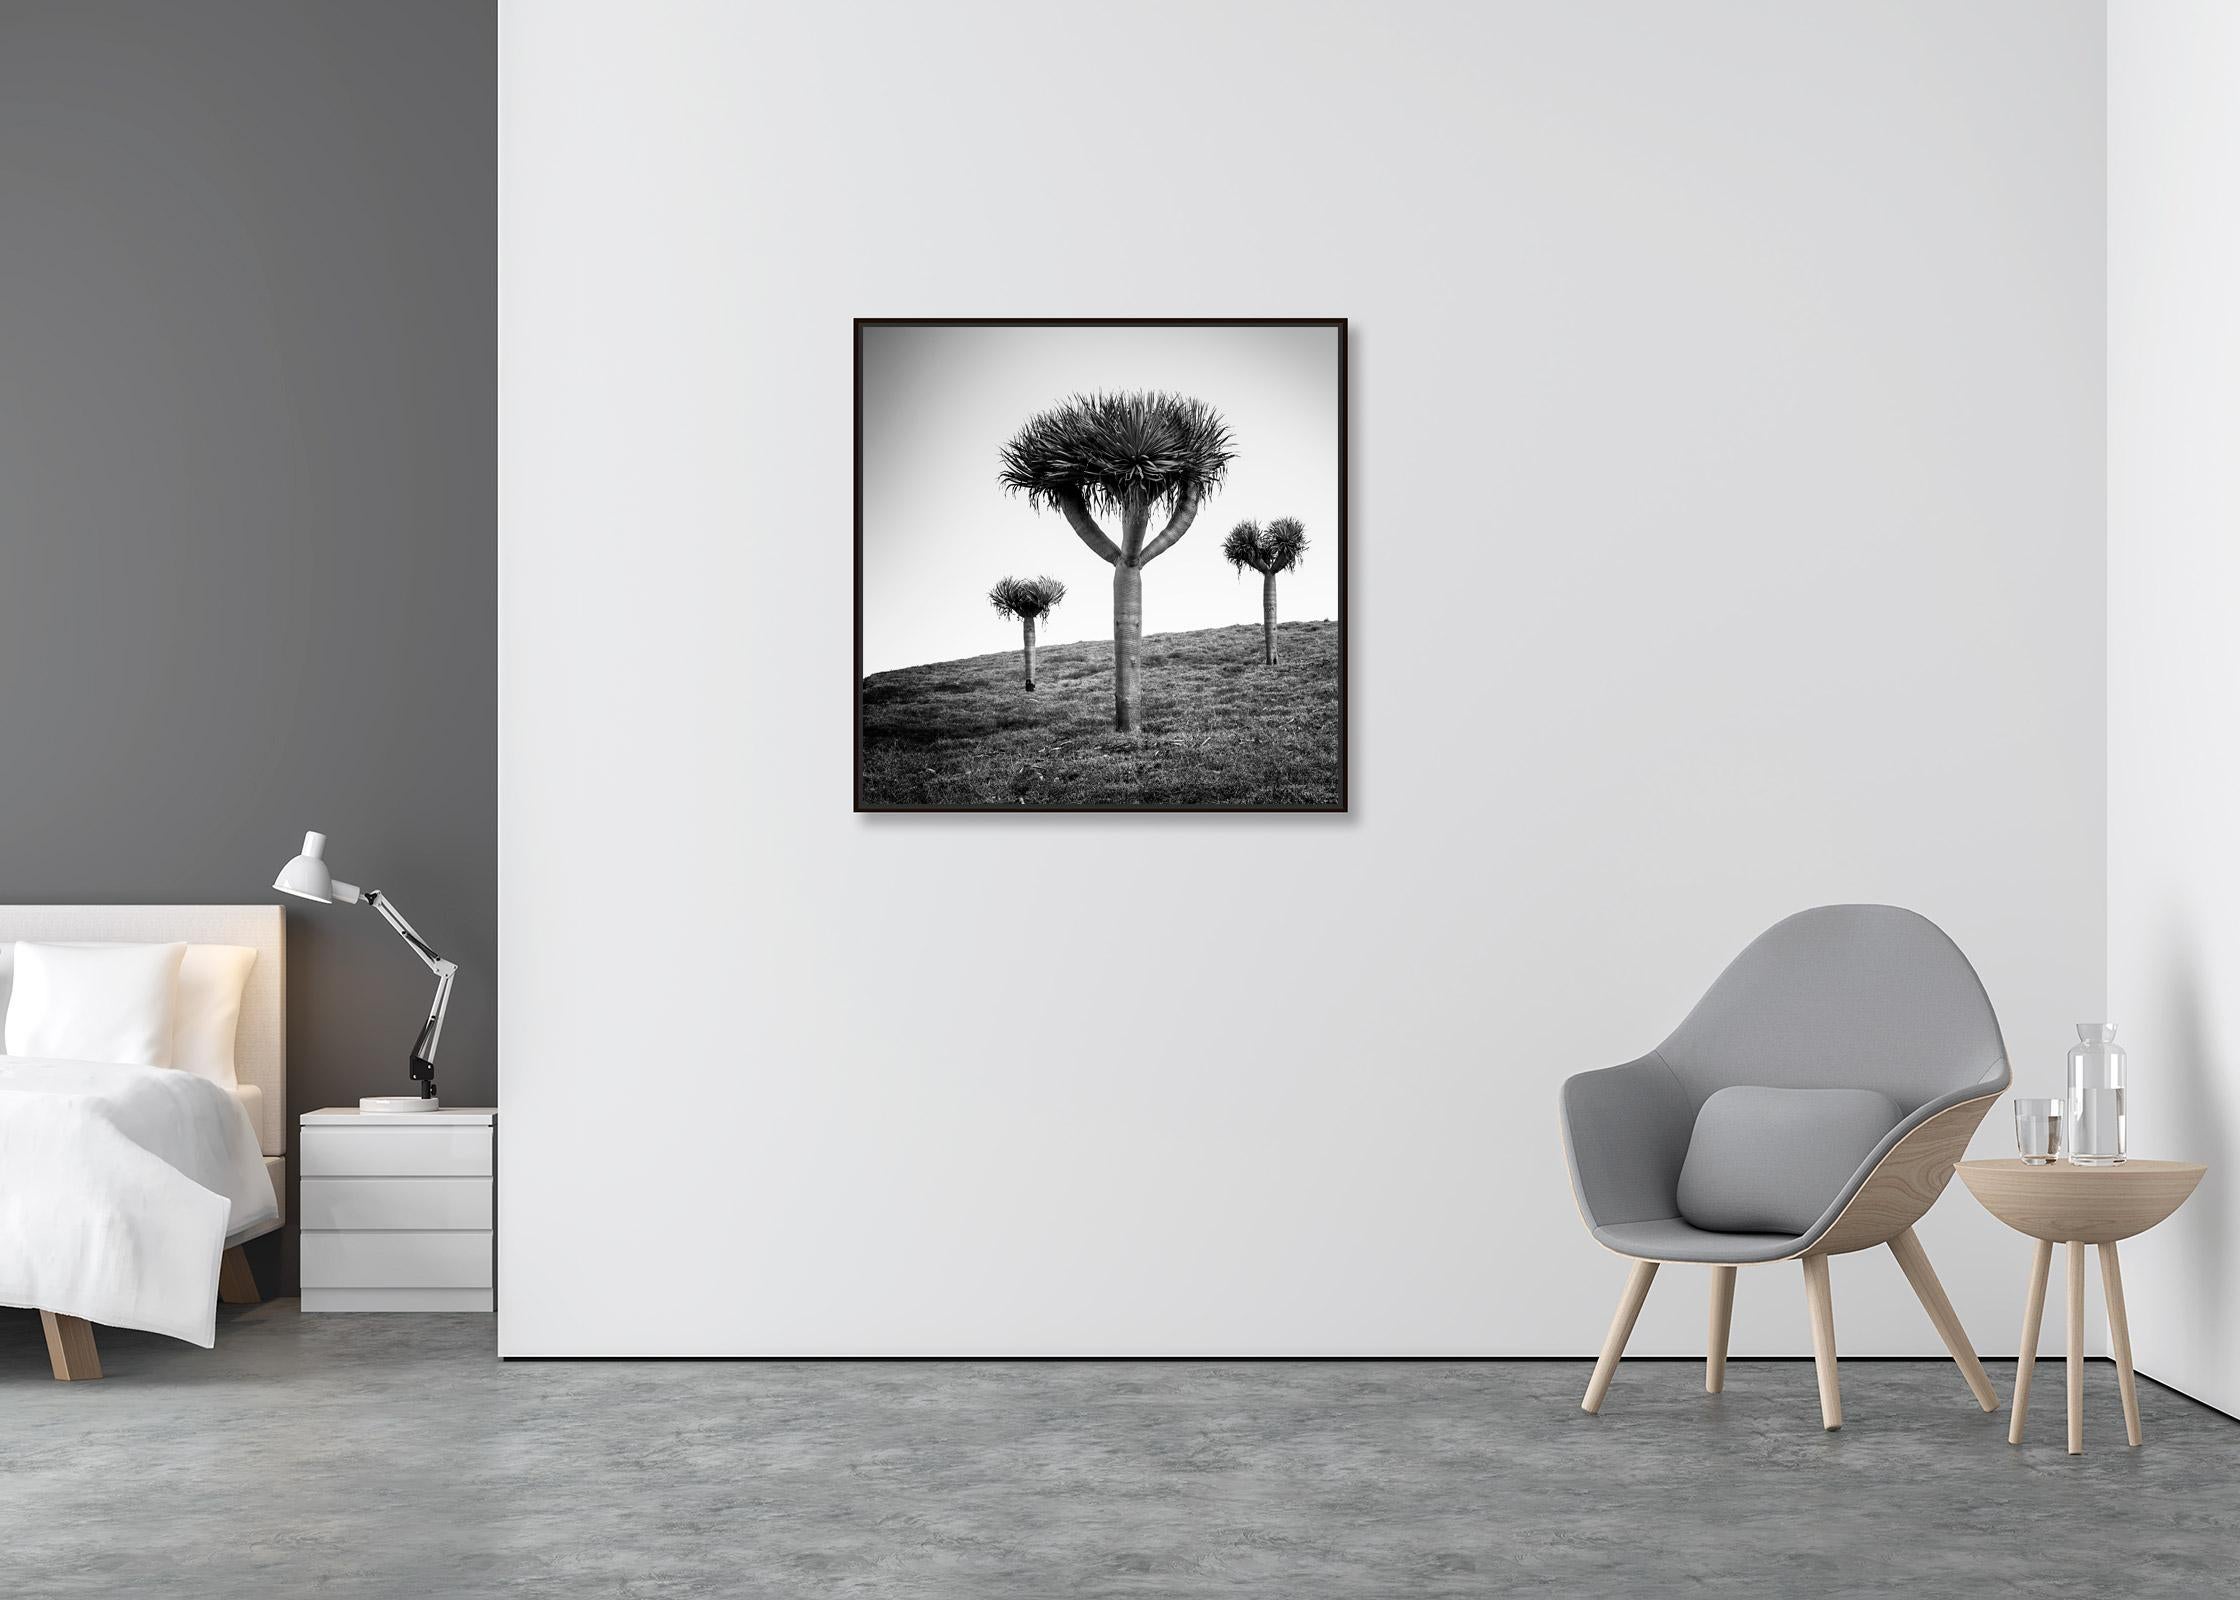 Canary Islands Dragon Tree Madeira Black and White Fine Art Landscape Photograph For Sale 2